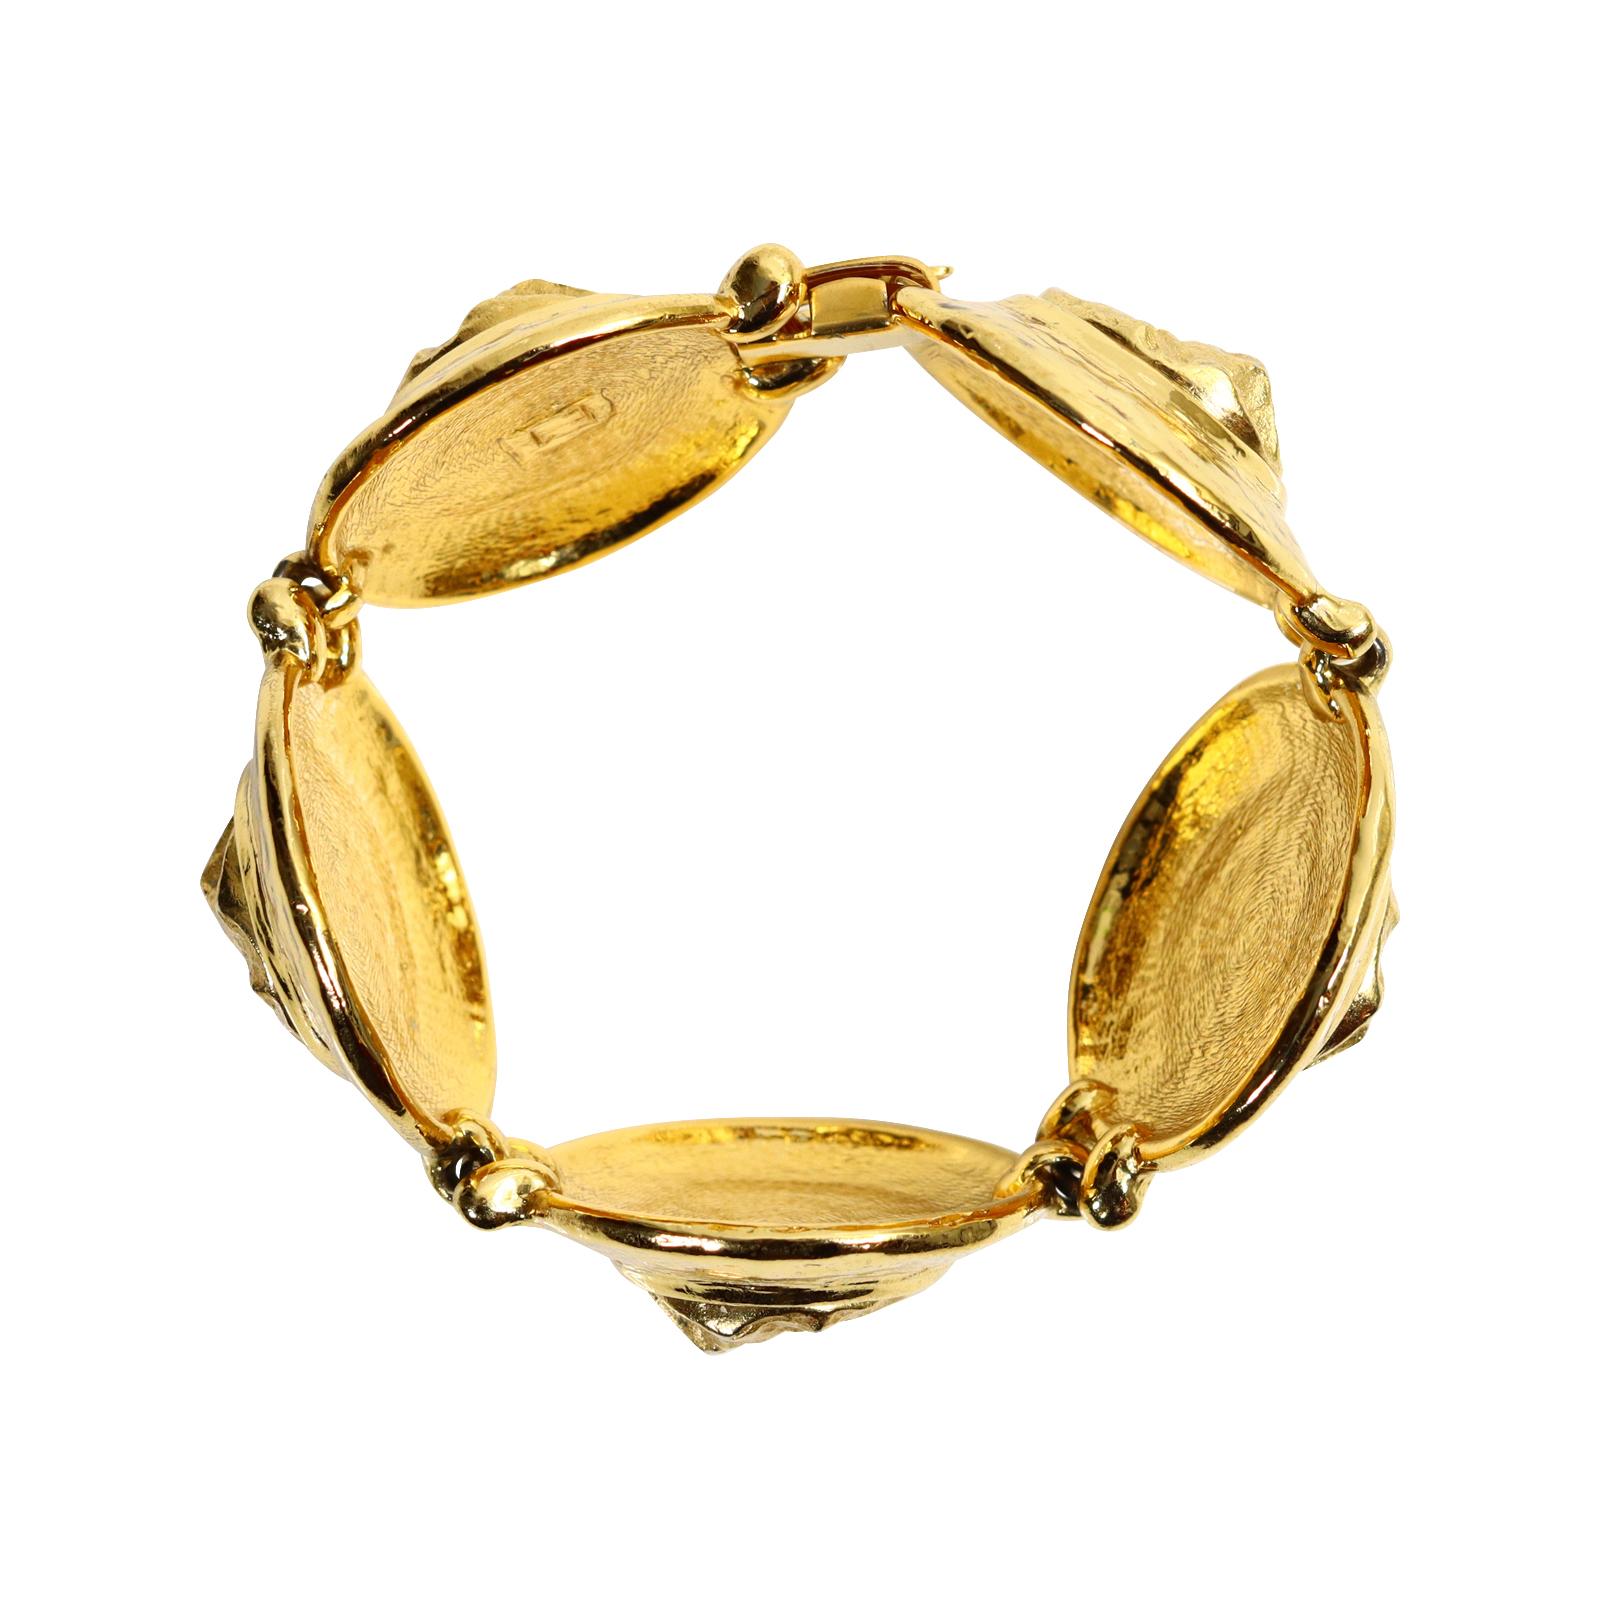 Vintage Yves Saint Laurent YSL Gold Tone Round Heavy Bracelet Circa 1980s In Good Condition For Sale In New York, NY